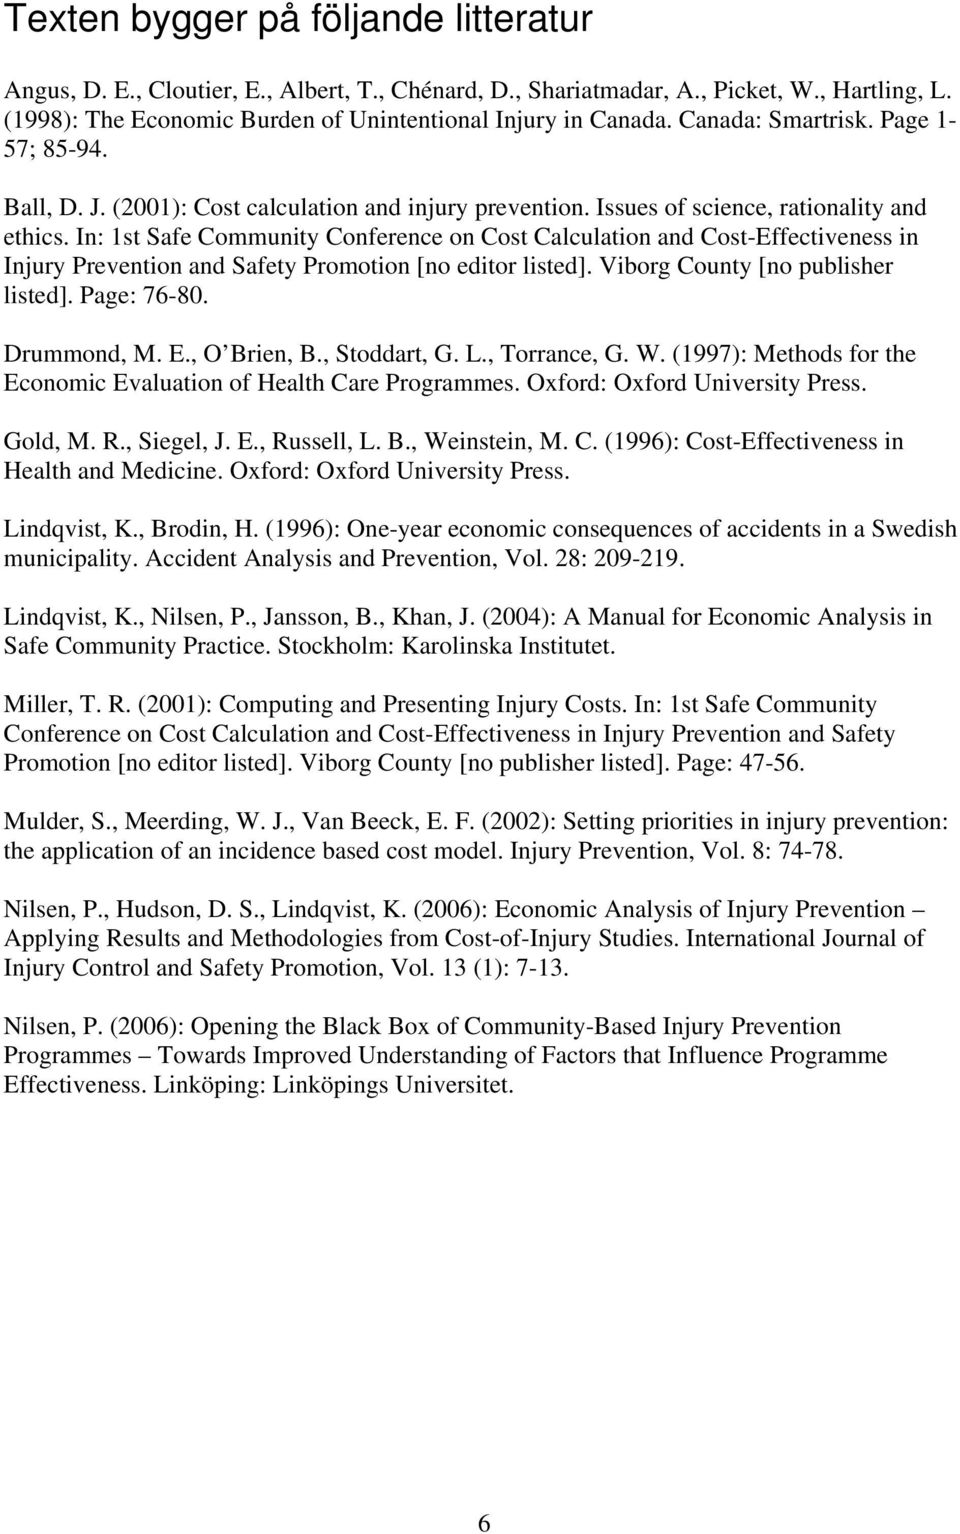 In: 1st Safe Community Conference on Cost Calculation and Cost-Effectiveness in Injury Prevention and Safety Promotion [no editor listed]. Viborg County [no publisher listed]. Page: 76-80.